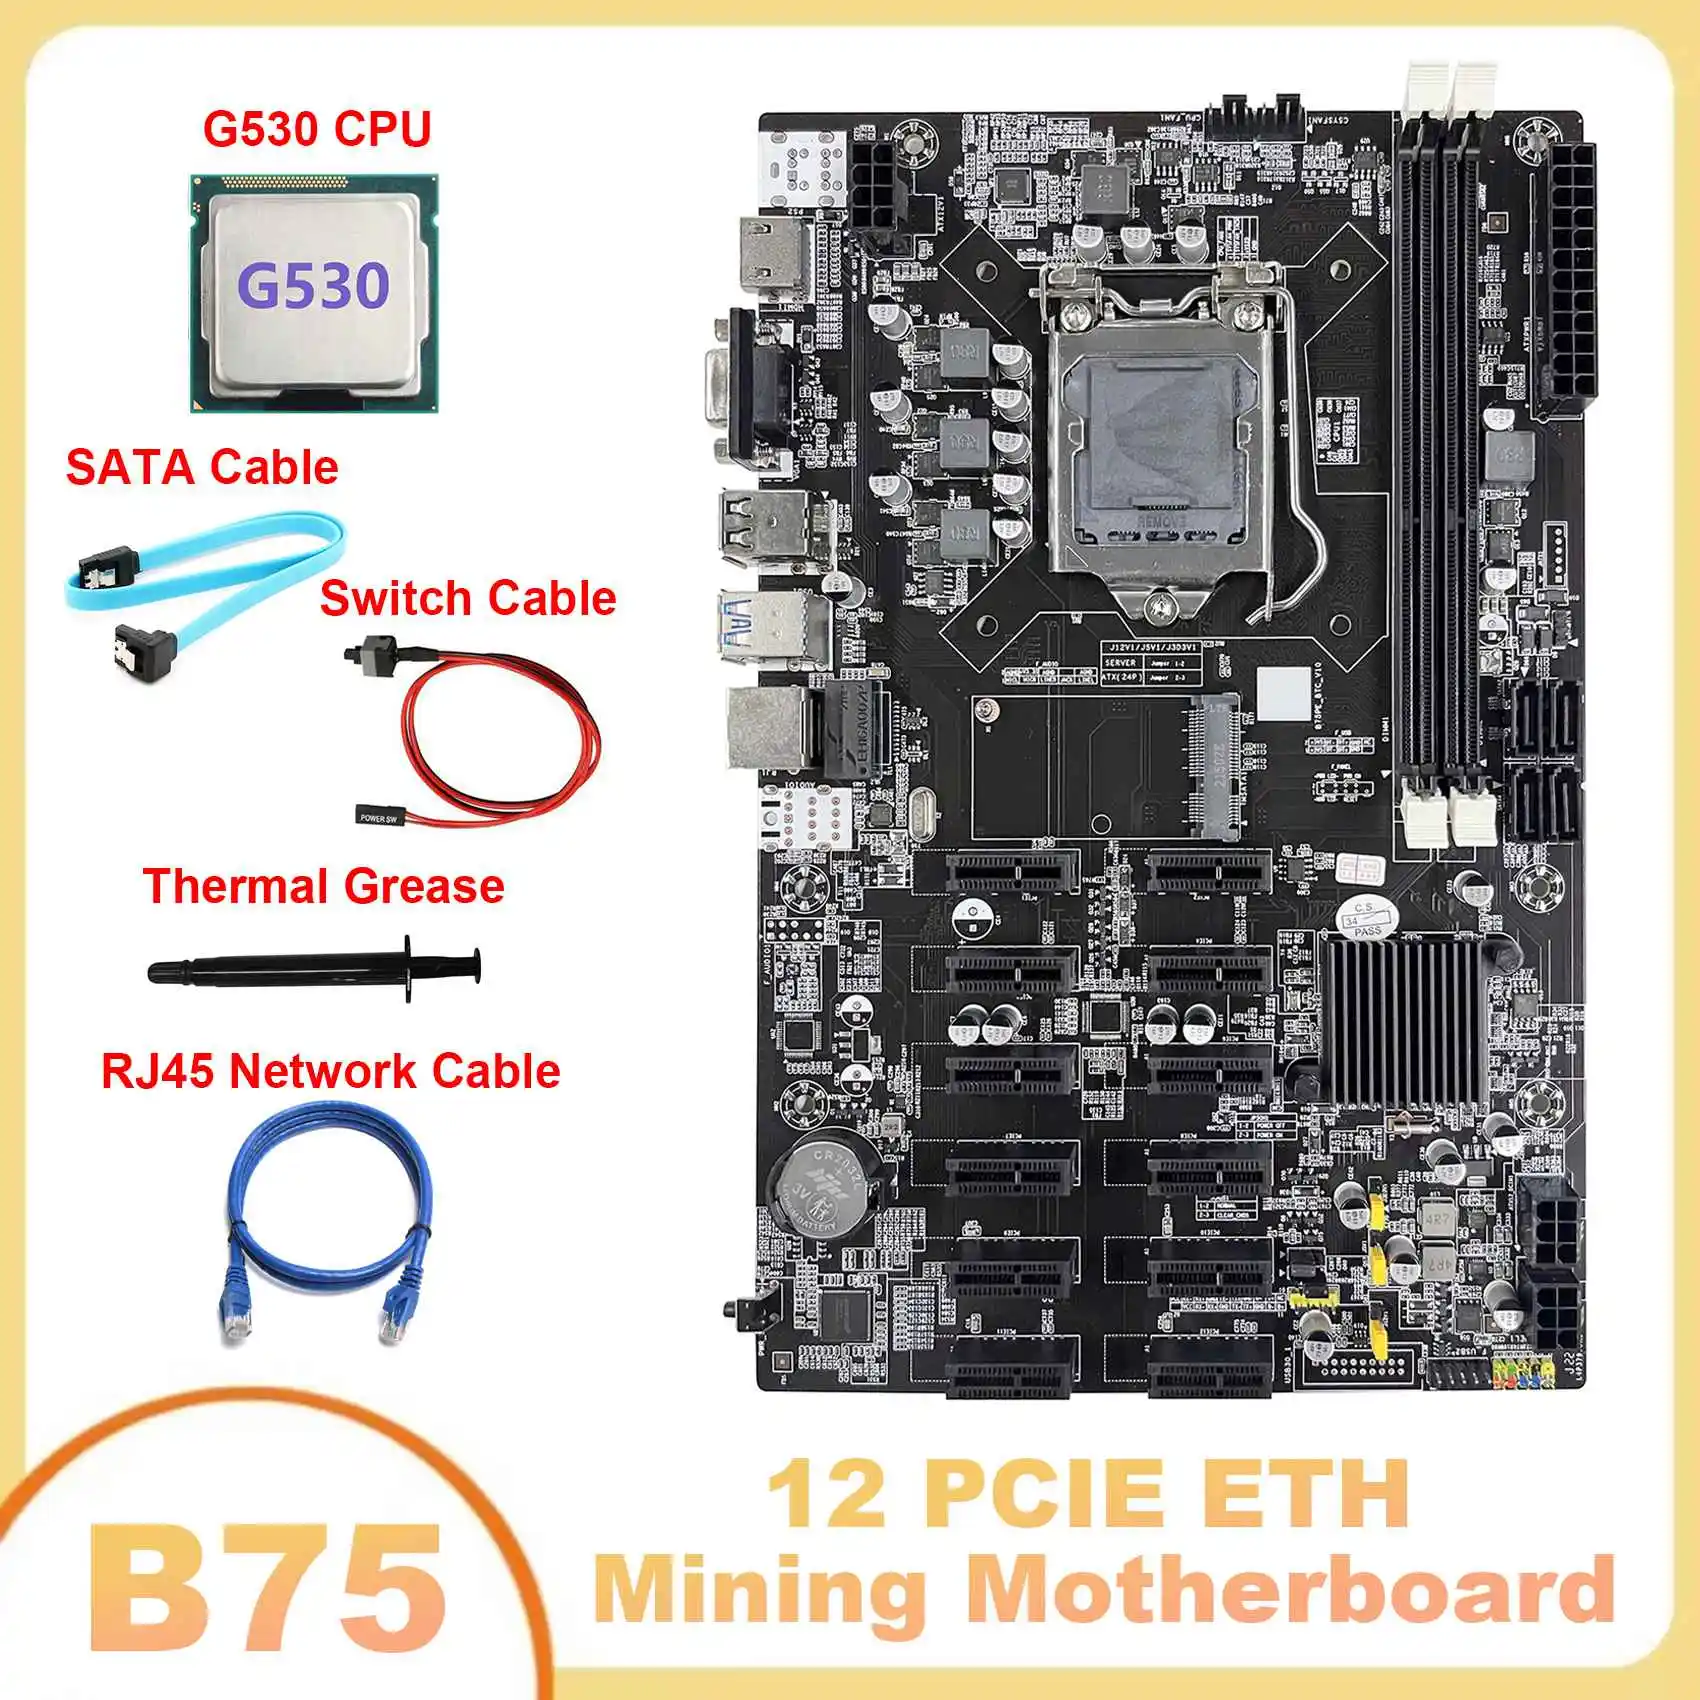 

B75 12 PCIE ETH Mining Motherboard LGA1155 +G530 CPU+SATA Cable+RJ45 Network Cable+Switch Cable+Thermal Grease